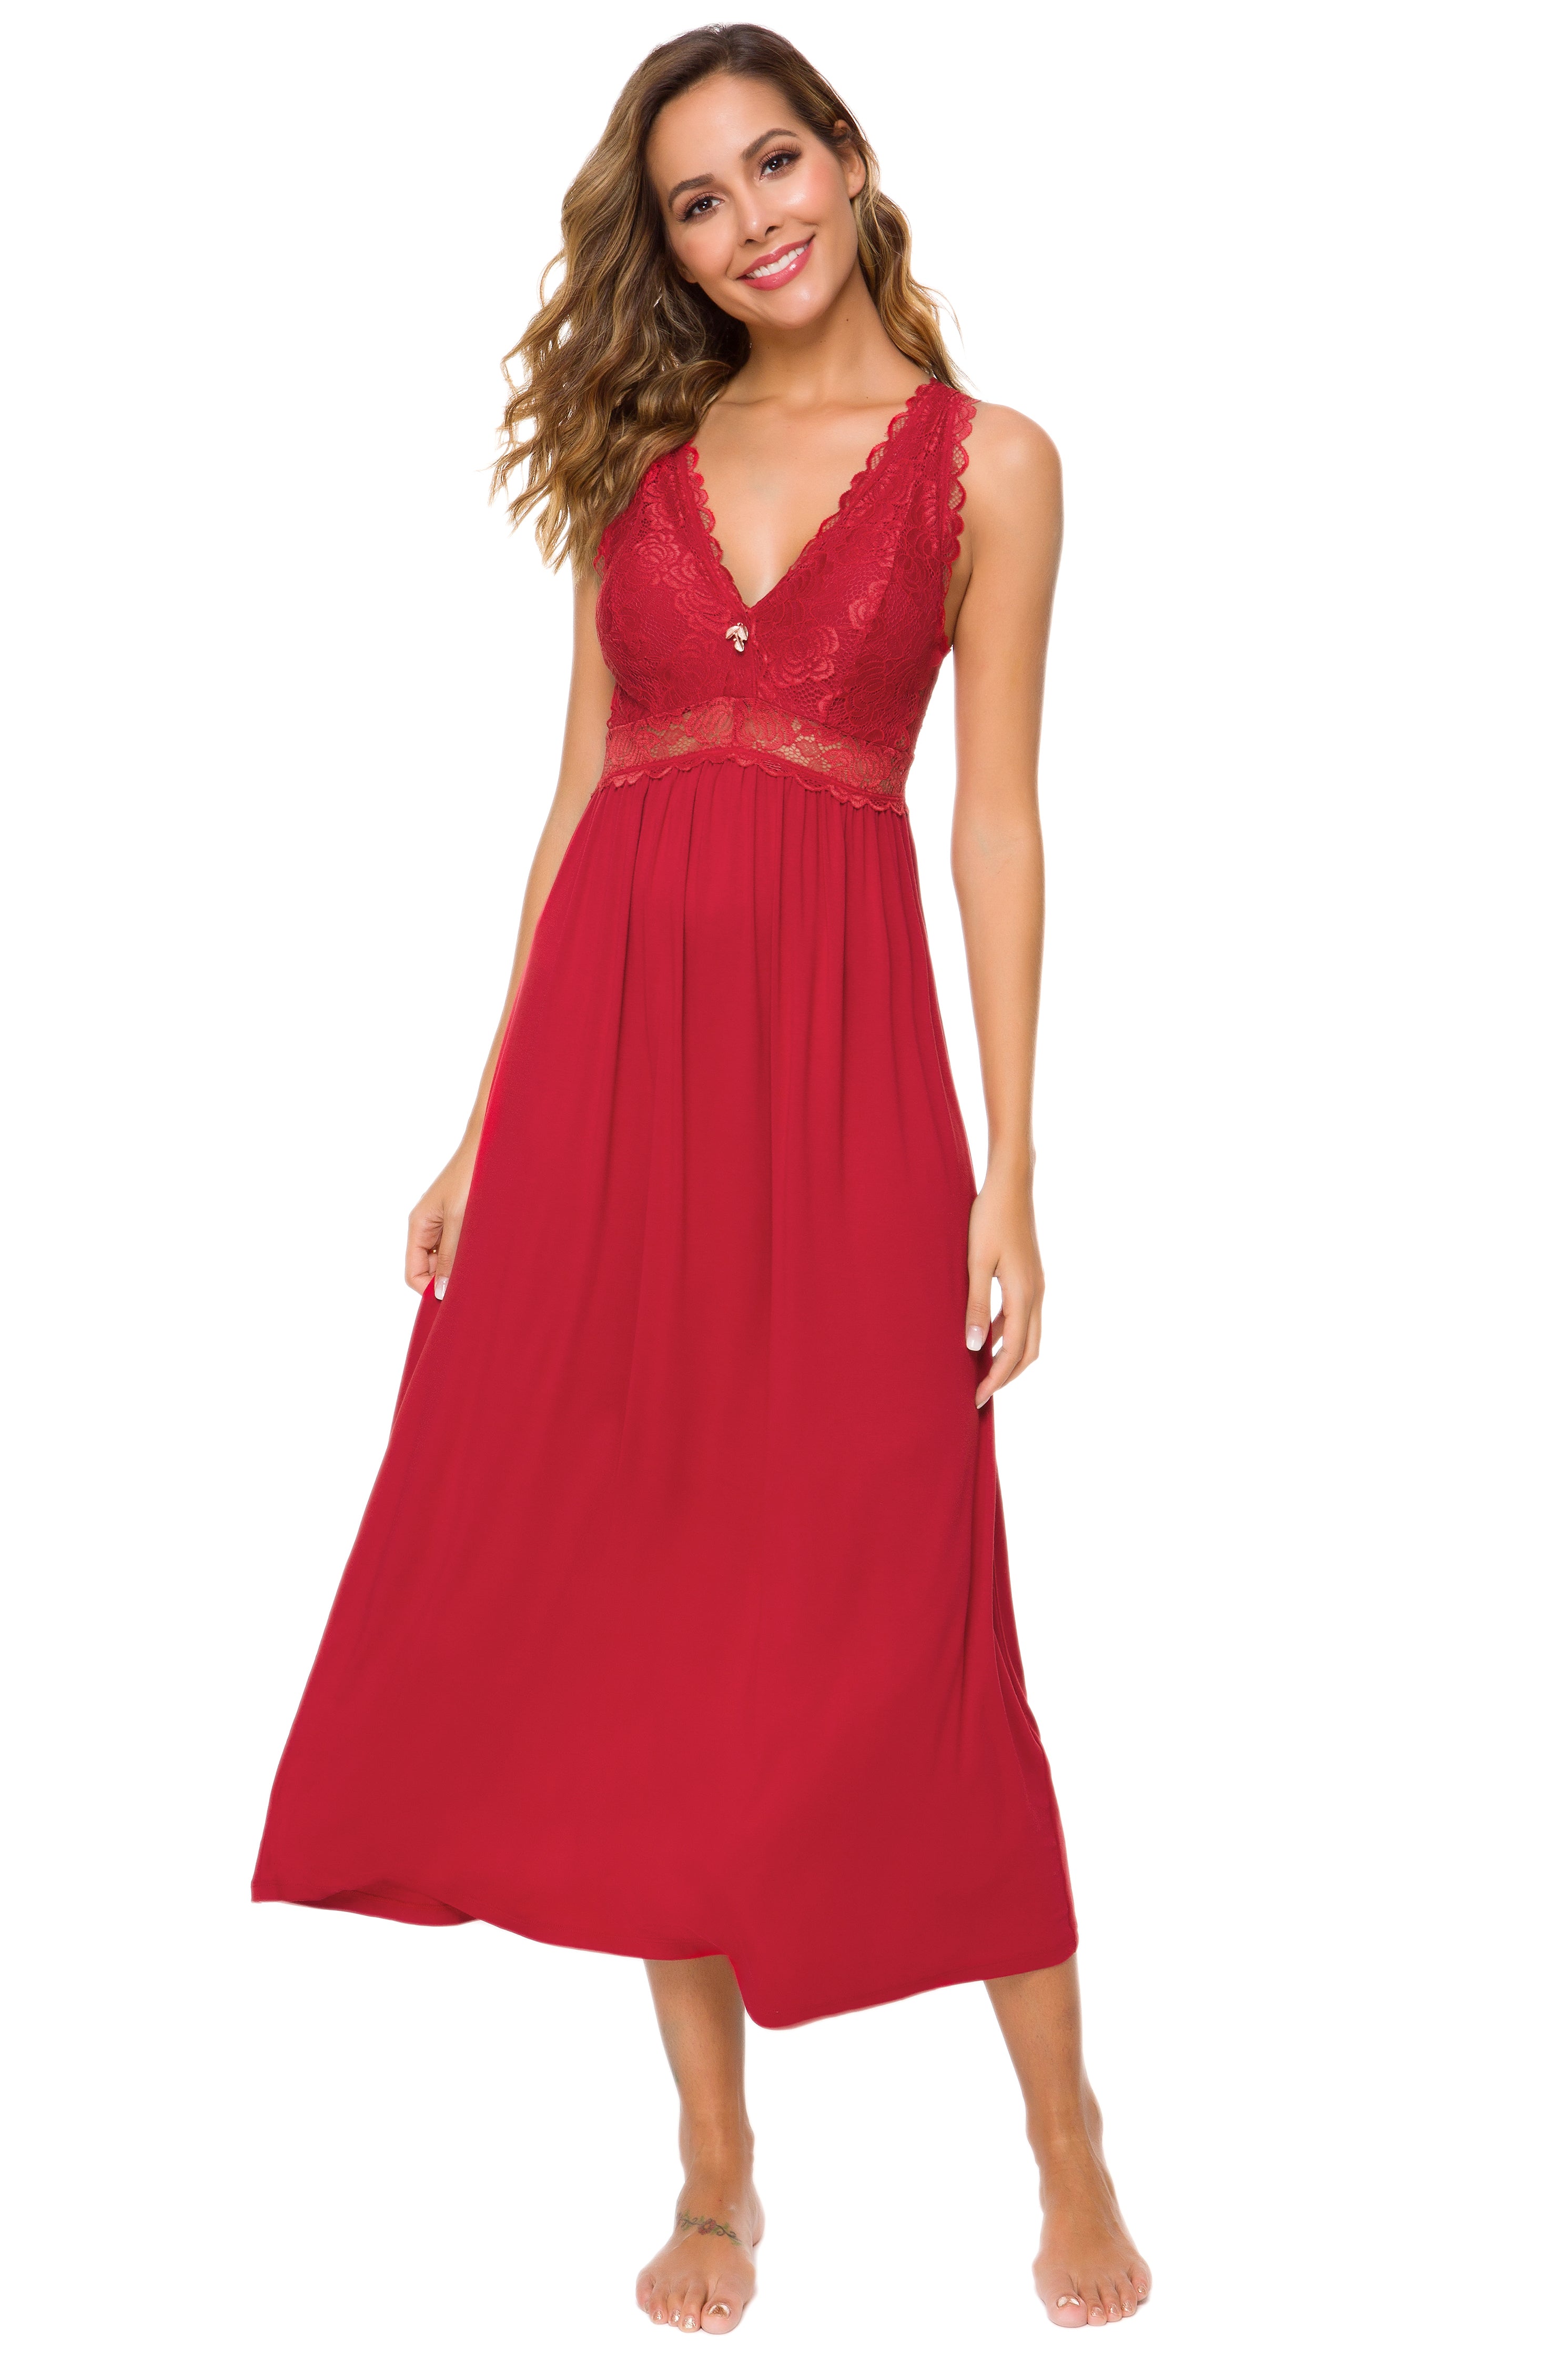 Sexy Lace Jersey Elegant Long Nightgown Chemises Red